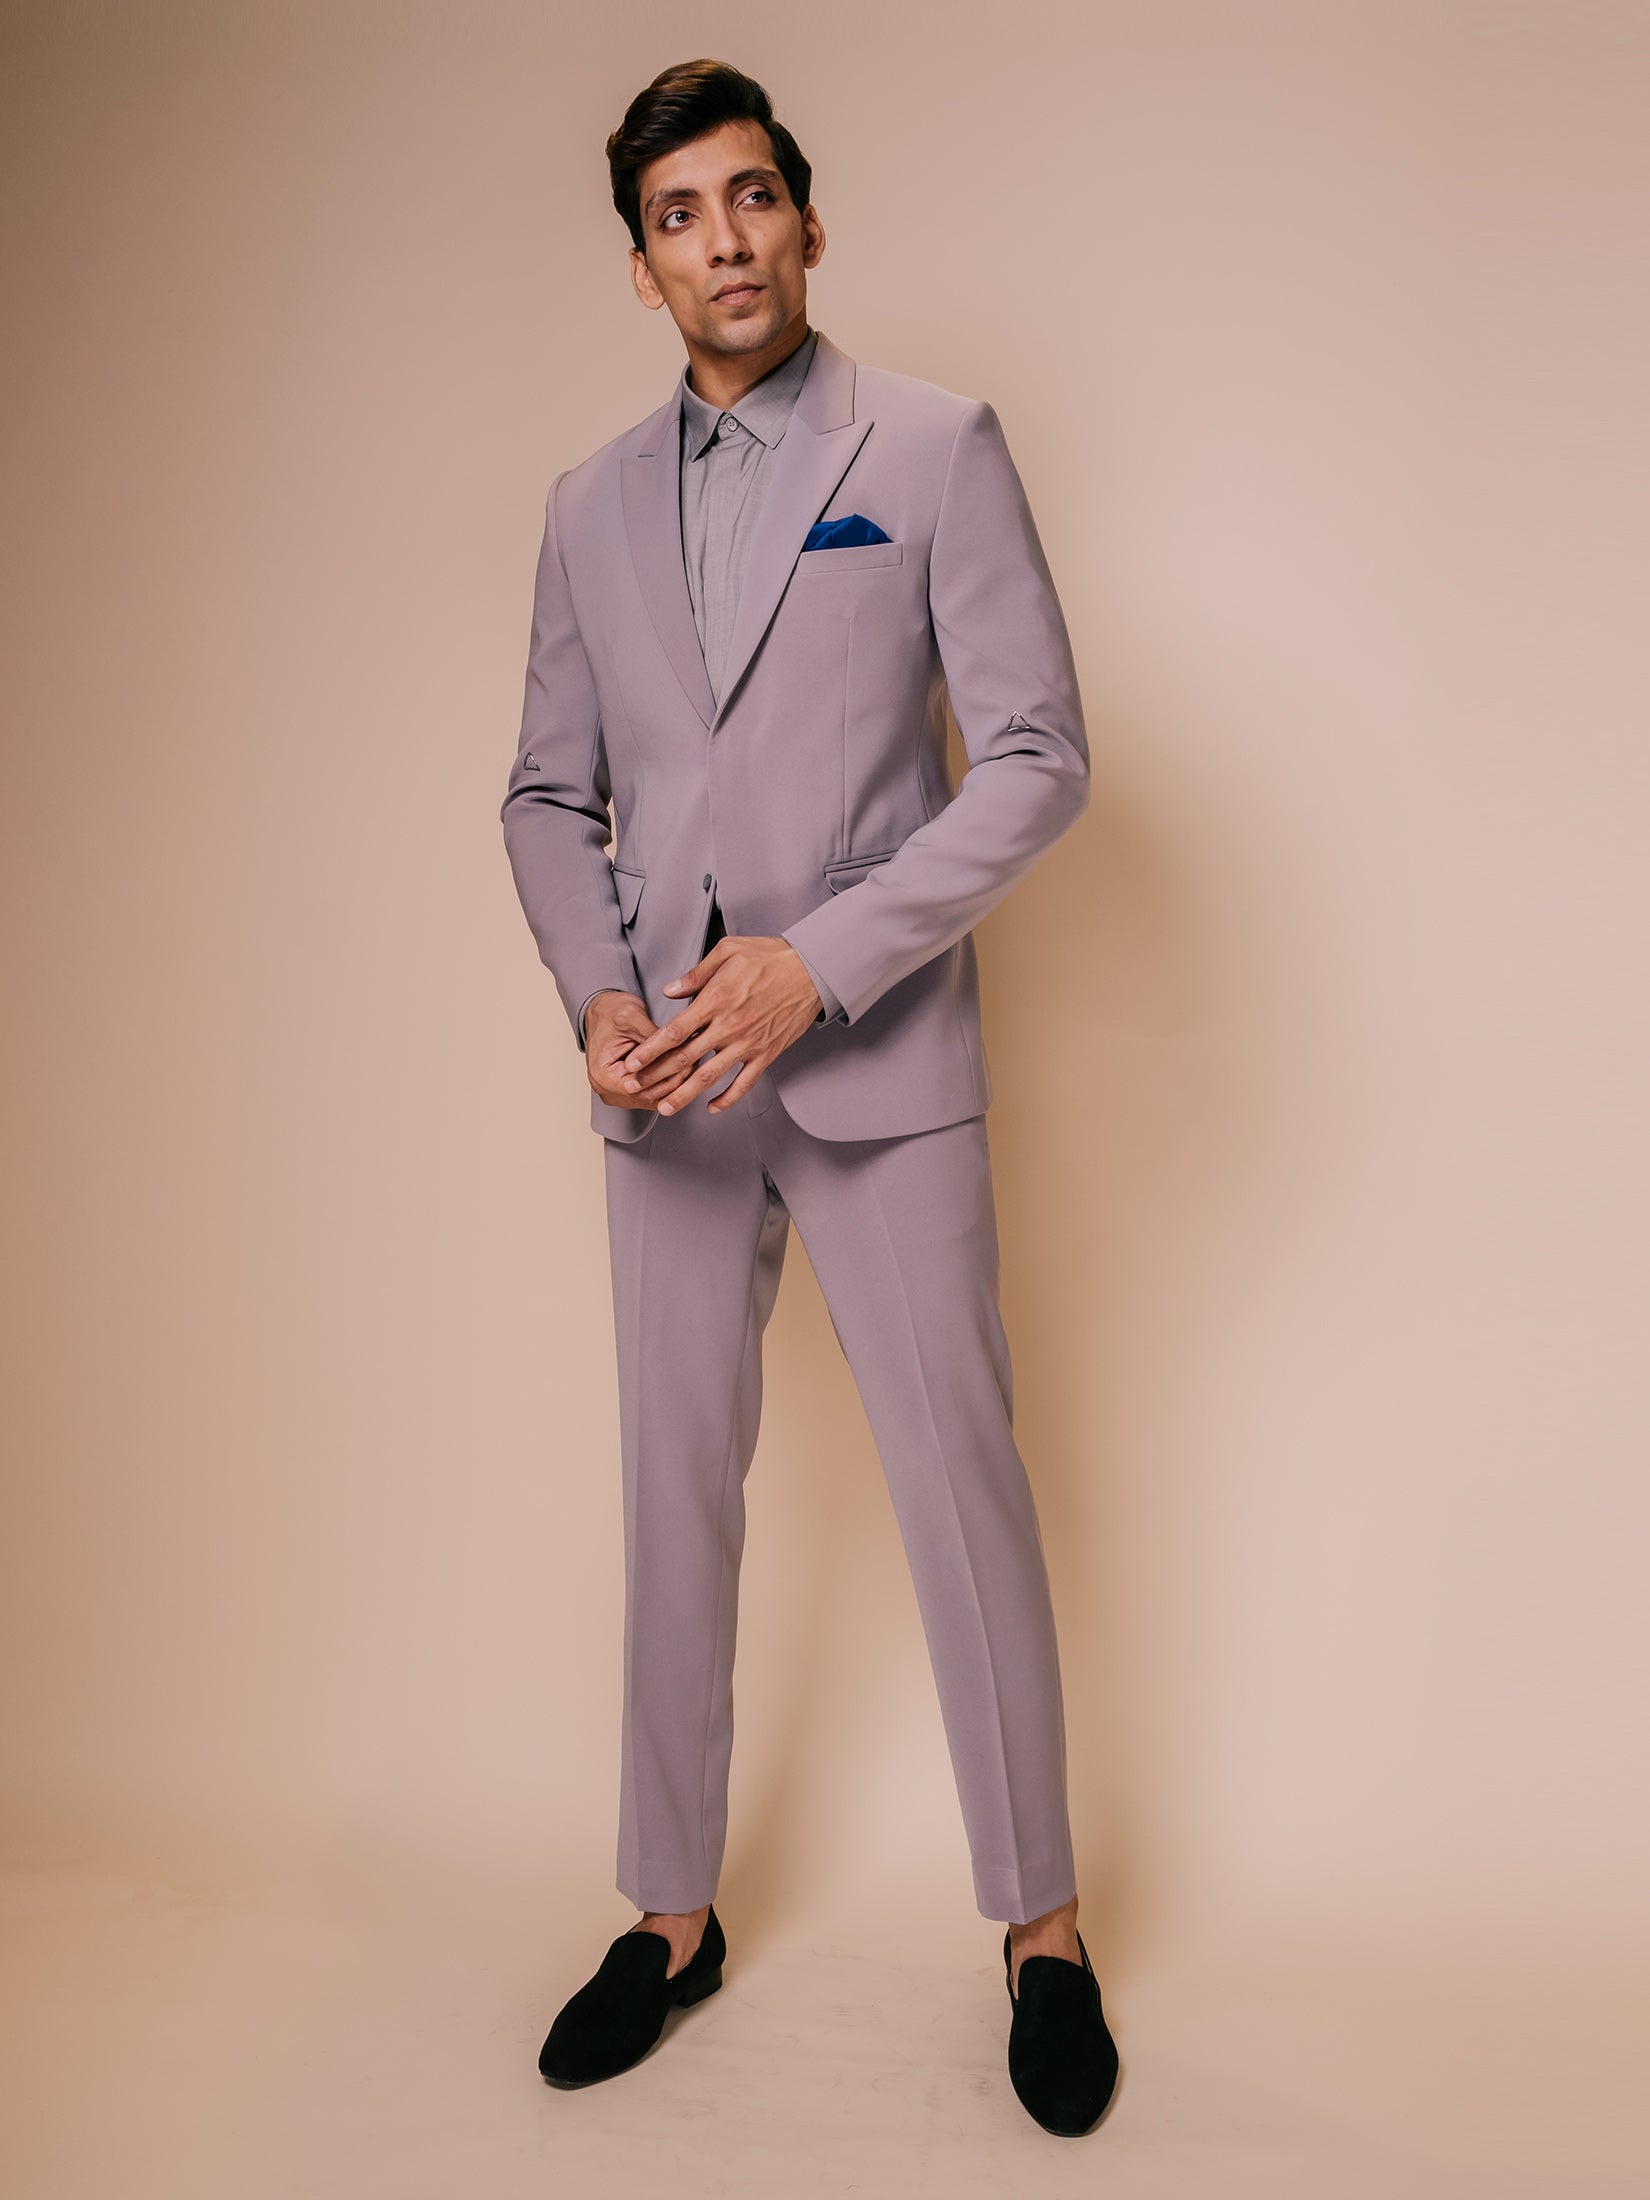 Grey Peak Shawl Lapel Suit With Embroidered Triangle Motif On Sleeves Paired With Trousers And Tonal Shirt